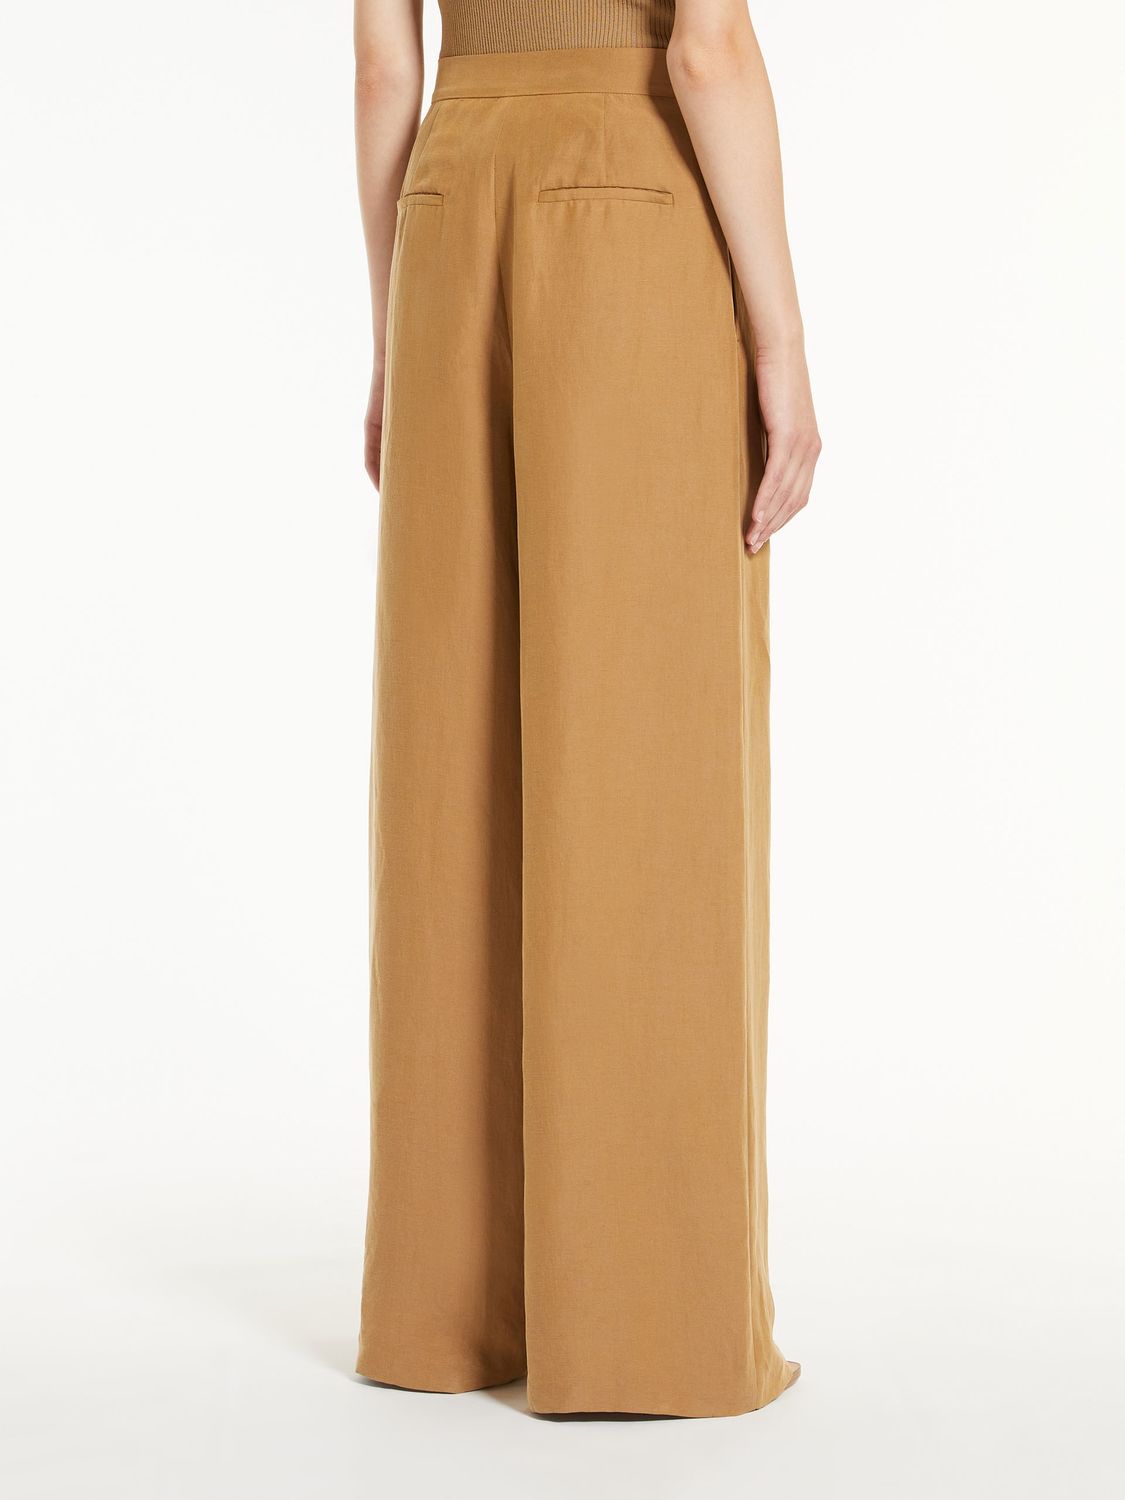 MAX MARA Light and Airy Trouser for Women - Linen and Silk Blend in Neutral Arena Shade